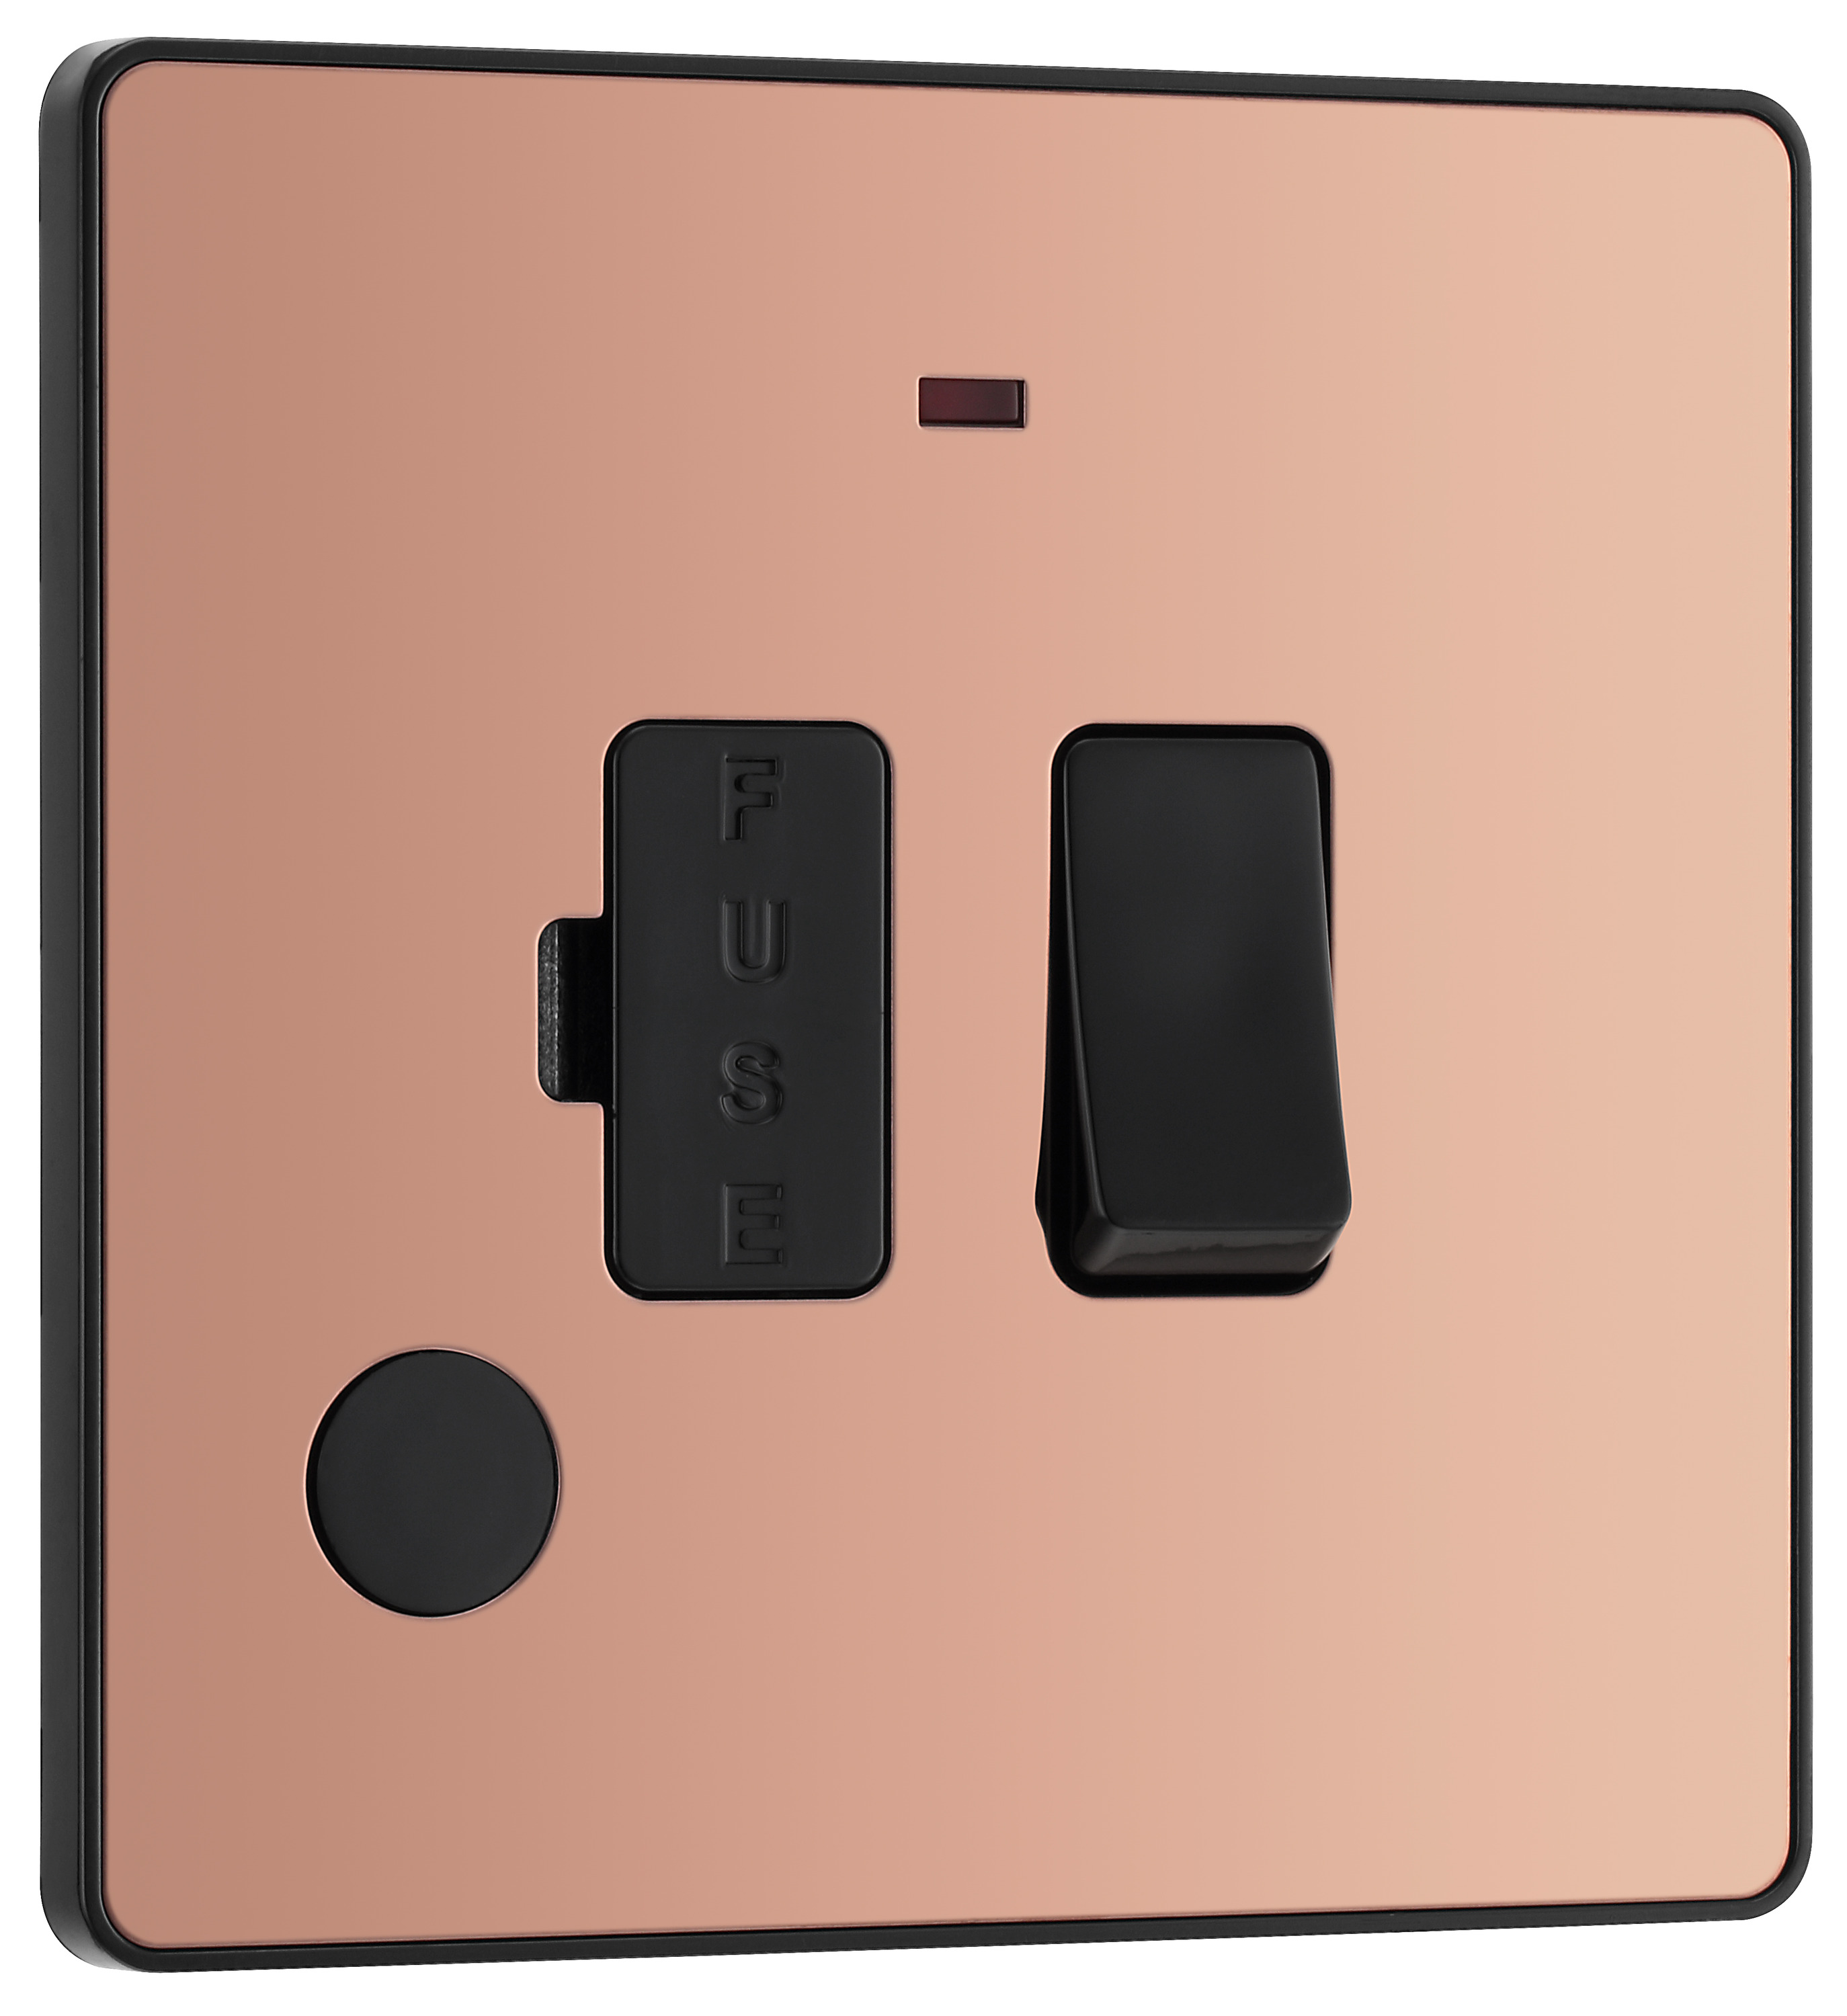 BG Evolve Polished Copper 13A Switched Fused Connection Unit with Power Led Indicator & Flex Outlet